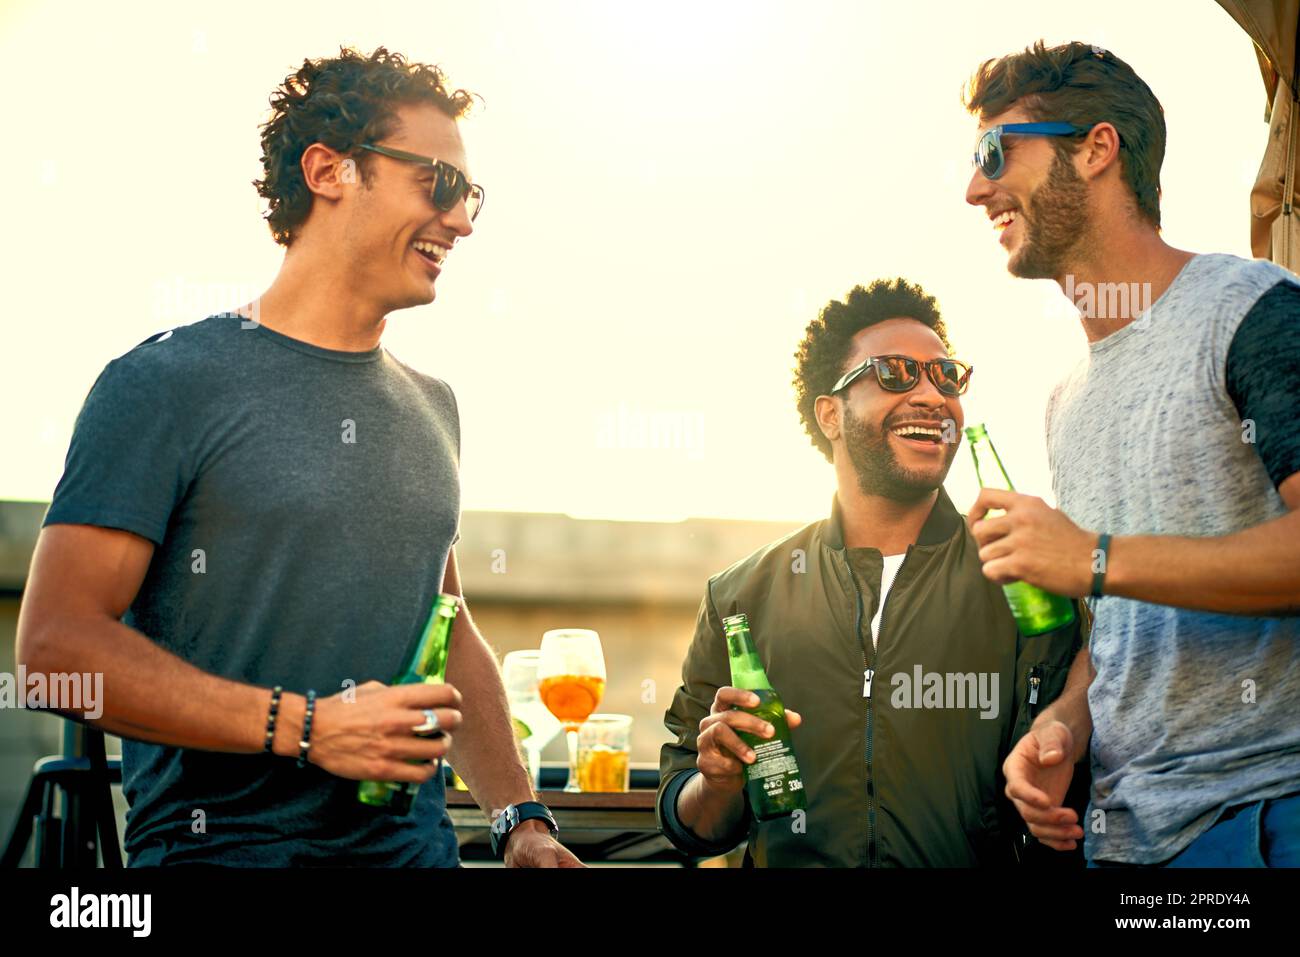 Friends dont let friends have fun alone. a group of young friends hanging out and having drinks together outdoors. Stock Photo